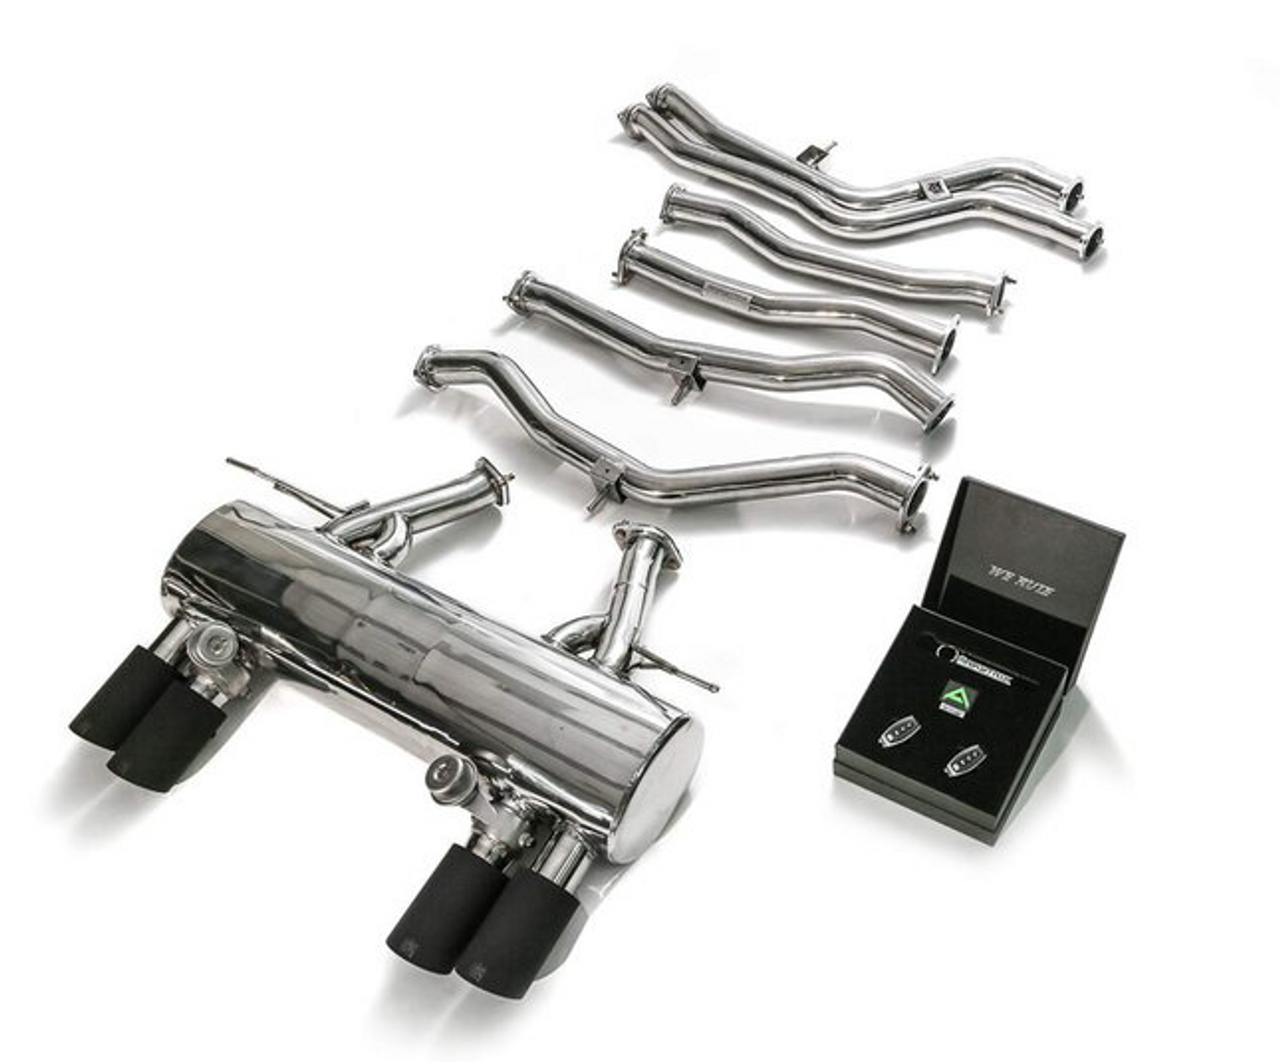 BMW Stainless Steel Valvetronic Catback Exhaust System with Quad Matte Black Tips - Armytrix BMF8M-QS11M 